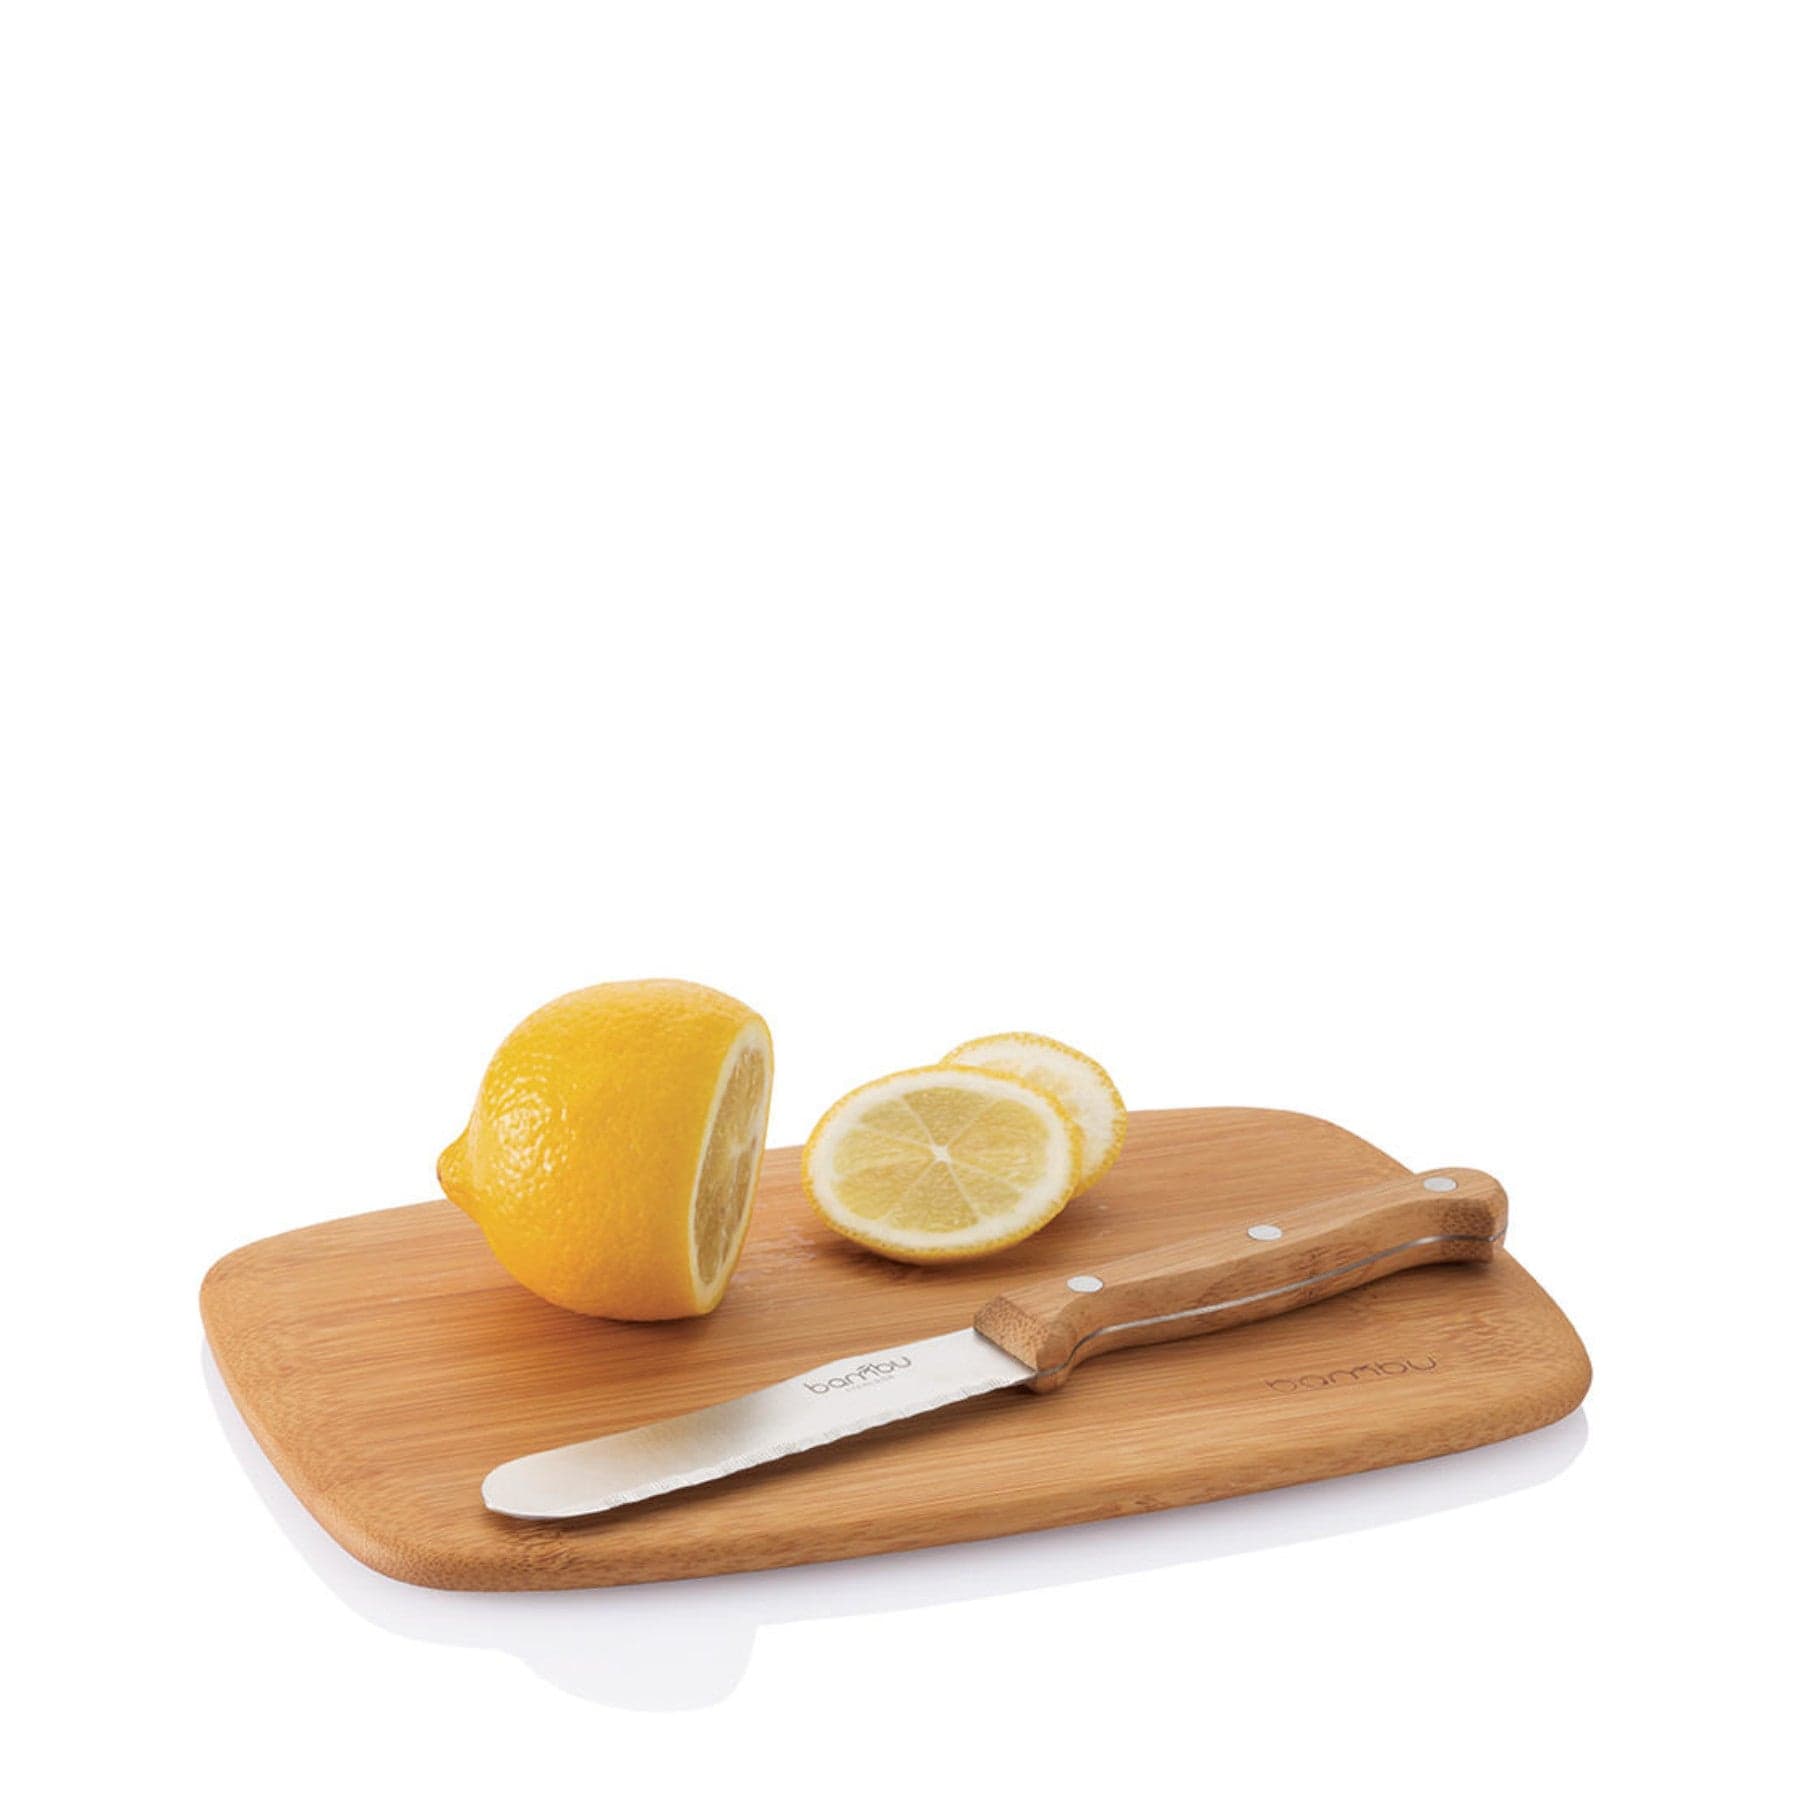 Fresh lemon halves on bamboo cutting board with stainless steel knife, kitchen preparation, isolated on white background